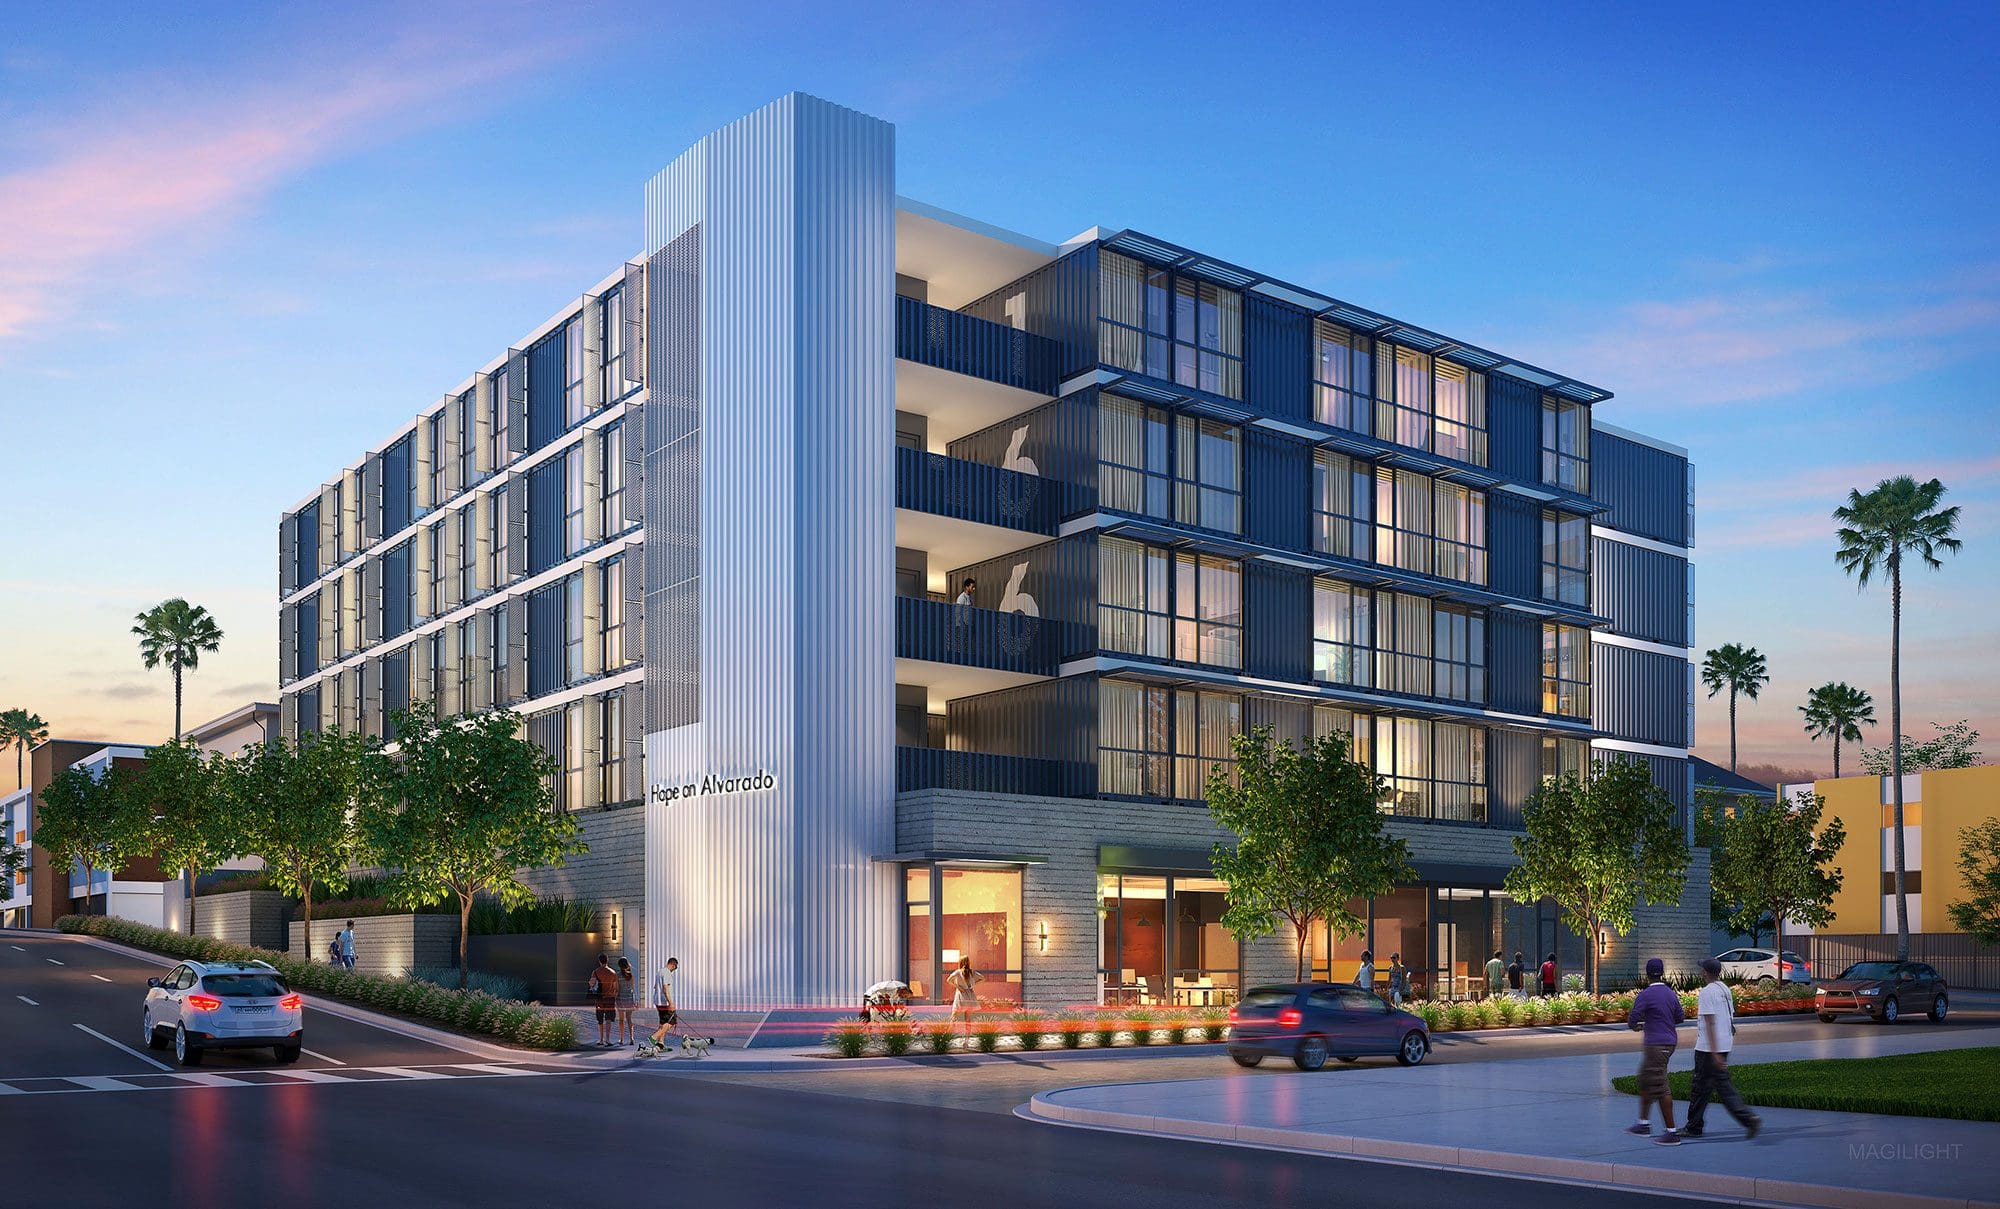 Hope on Alvarado – A “Case Study” in Affordable Housing